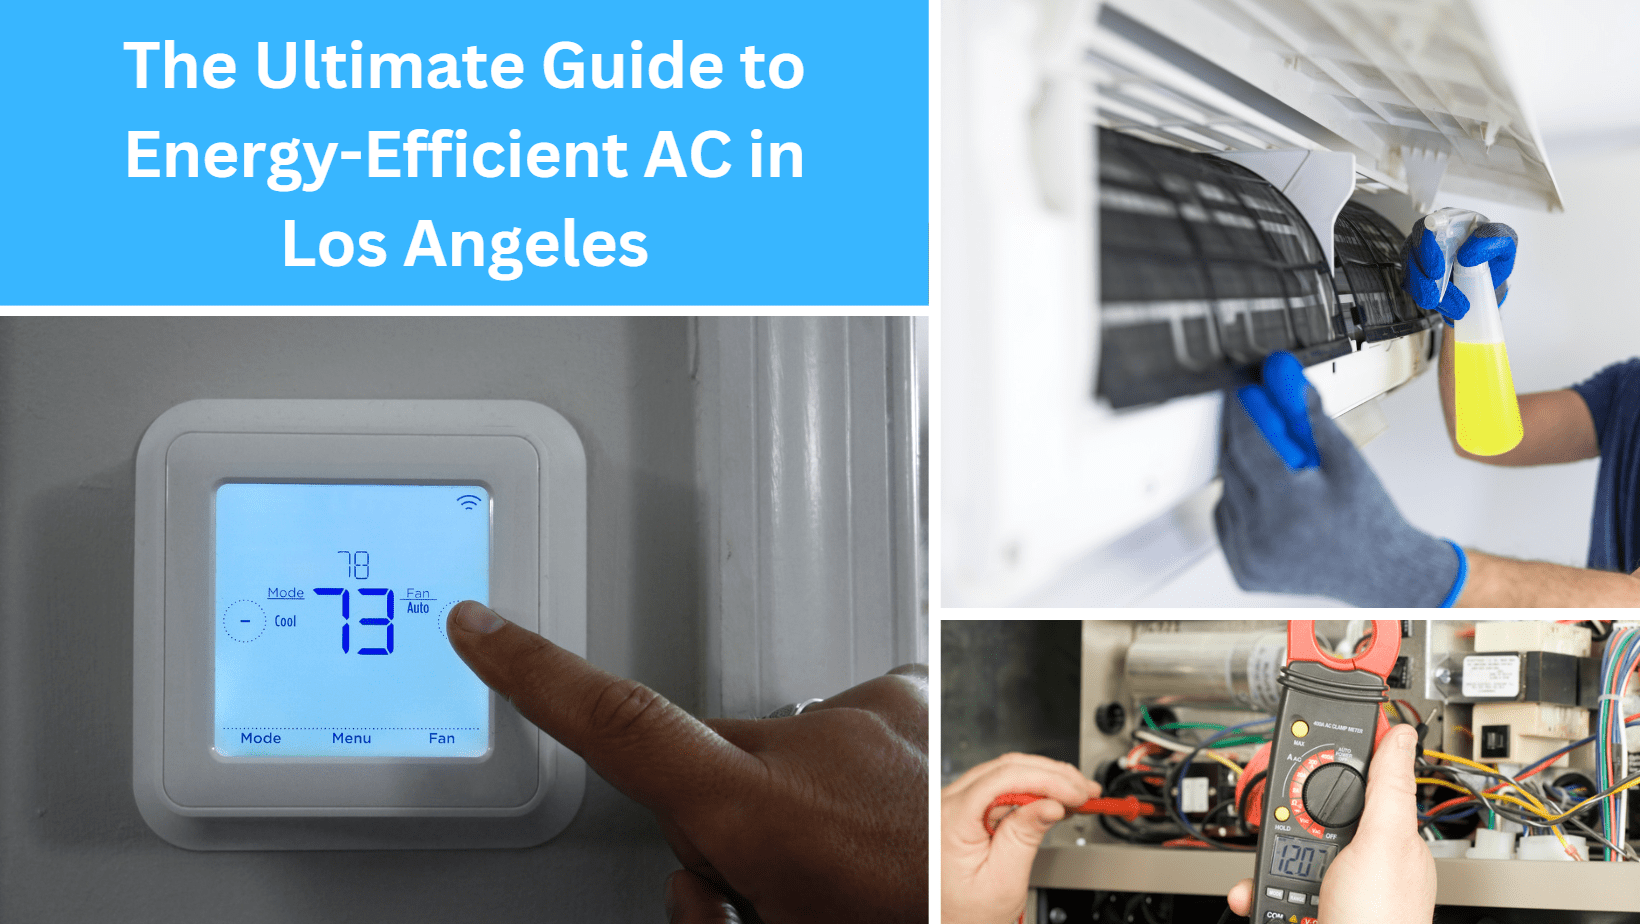 HVAC repair in Los Angeles, Pasadena, North Hollywood, Beverly Hills, Burbank, Alhambra involves expert troubleshooting of common AC not working issues including AC not blowing cold air or central AC not working. Energy-efficient AC in California, smart homes, Alexa, Google, and Apple HomePod integration, Wi-Fi enabled AC units, and thermostats offer a smart, cost-effective solution. Regular HVAC system maintenance, replacing air filters, installing a programmable thermostat, using ceiling fans, blocking out sun aid in efficient AC use. LAHVAC, with professional HVAC repair services and smart home integration, ensures your AC is not blowing hot air. California's energy rebate program for smart, energy-efficient AC systems facilitates affordable HVAC solutions for homes in Hollywood and beyond.